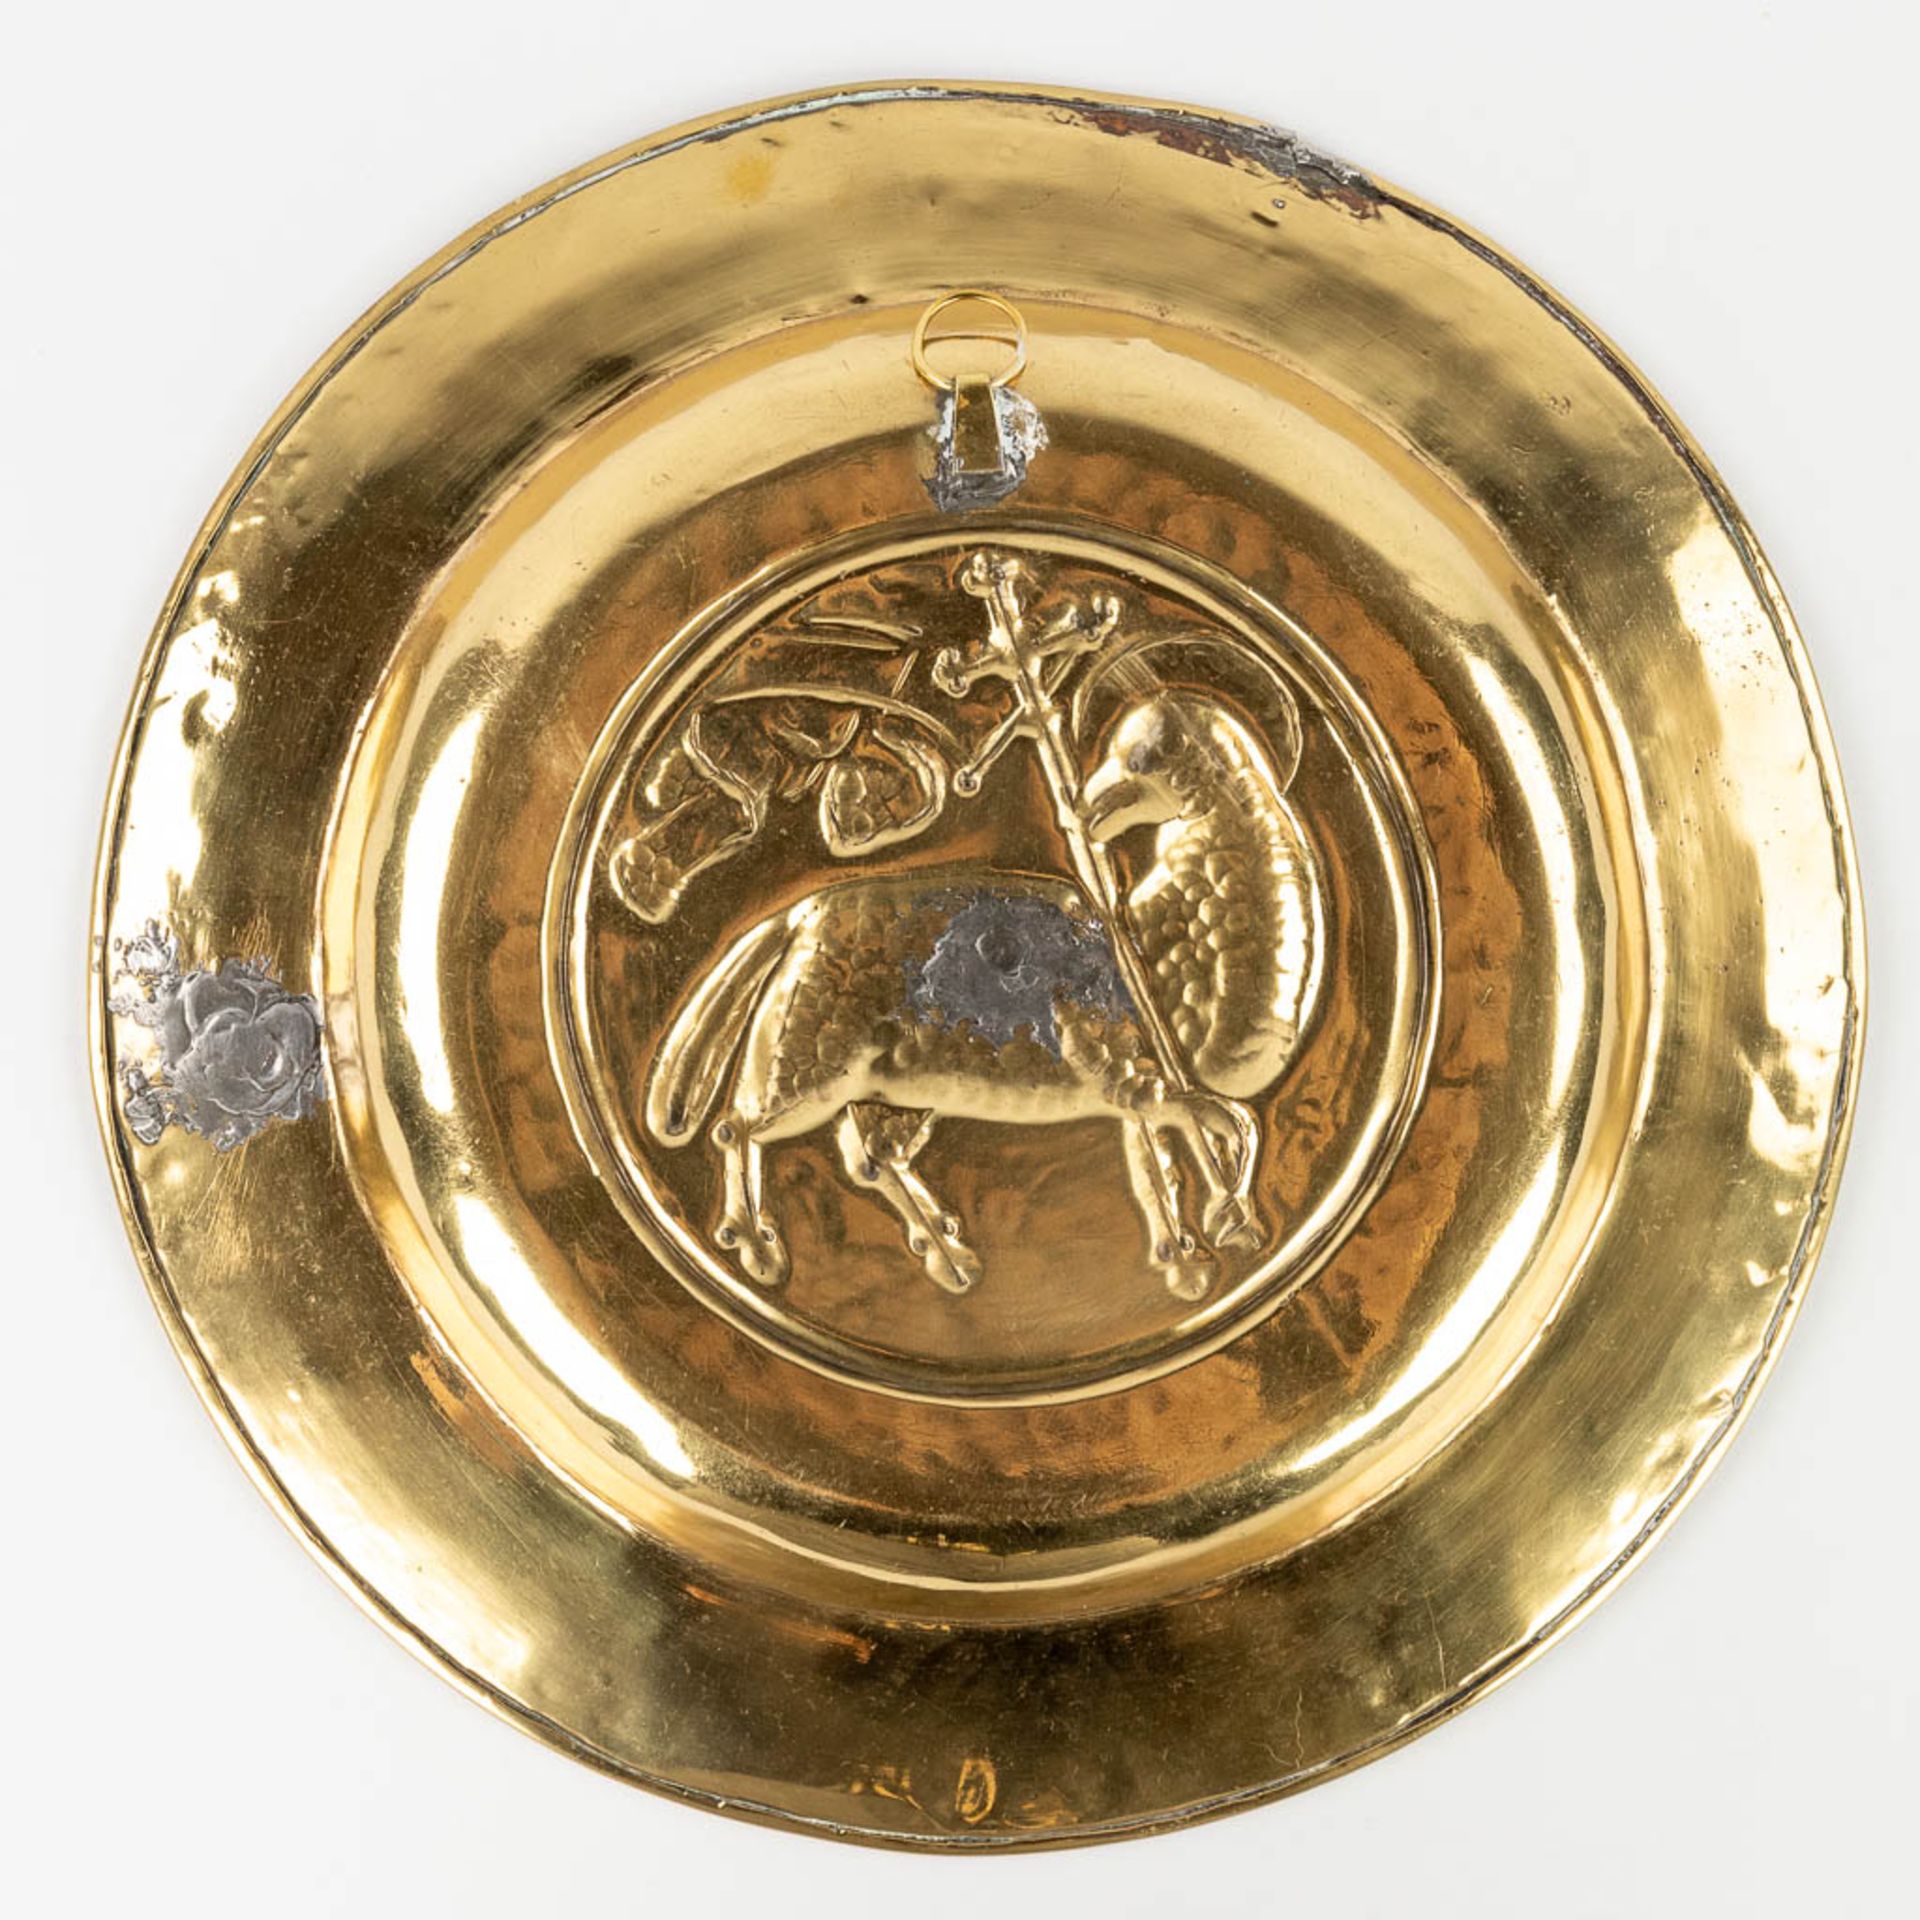 A large baptism bowl, Brass, images of the Holy Lamb. 16th/17th C. (H: 3,7 x D: 37 cm) - Image 8 of 12